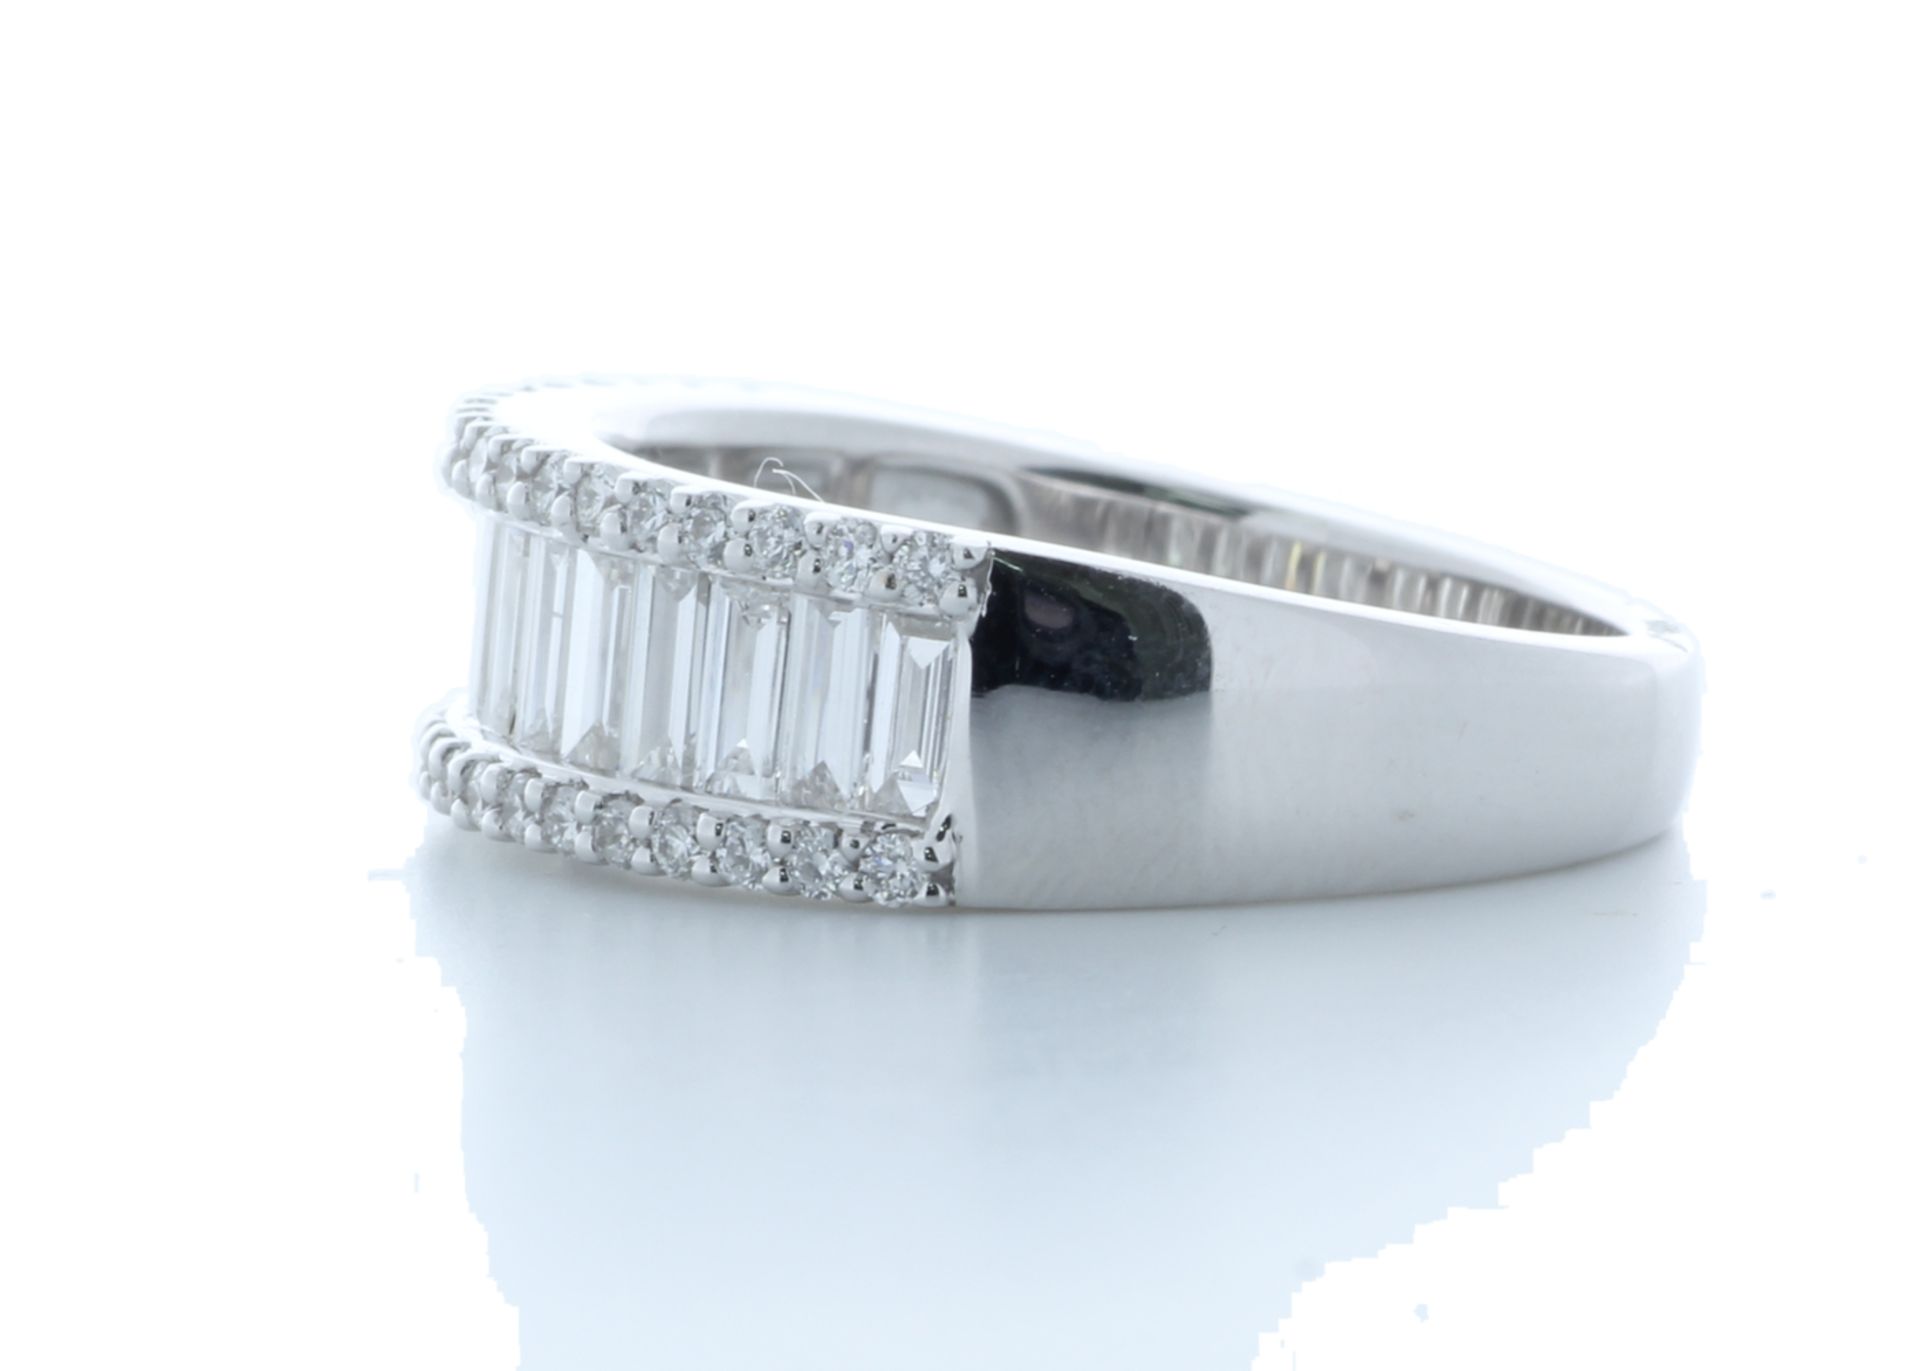 18ct White Gold Channel Set Semi Eternity Diamond Ring 1.07 Carats - Valued by AGI £8,300.00 - - Image 2 of 4